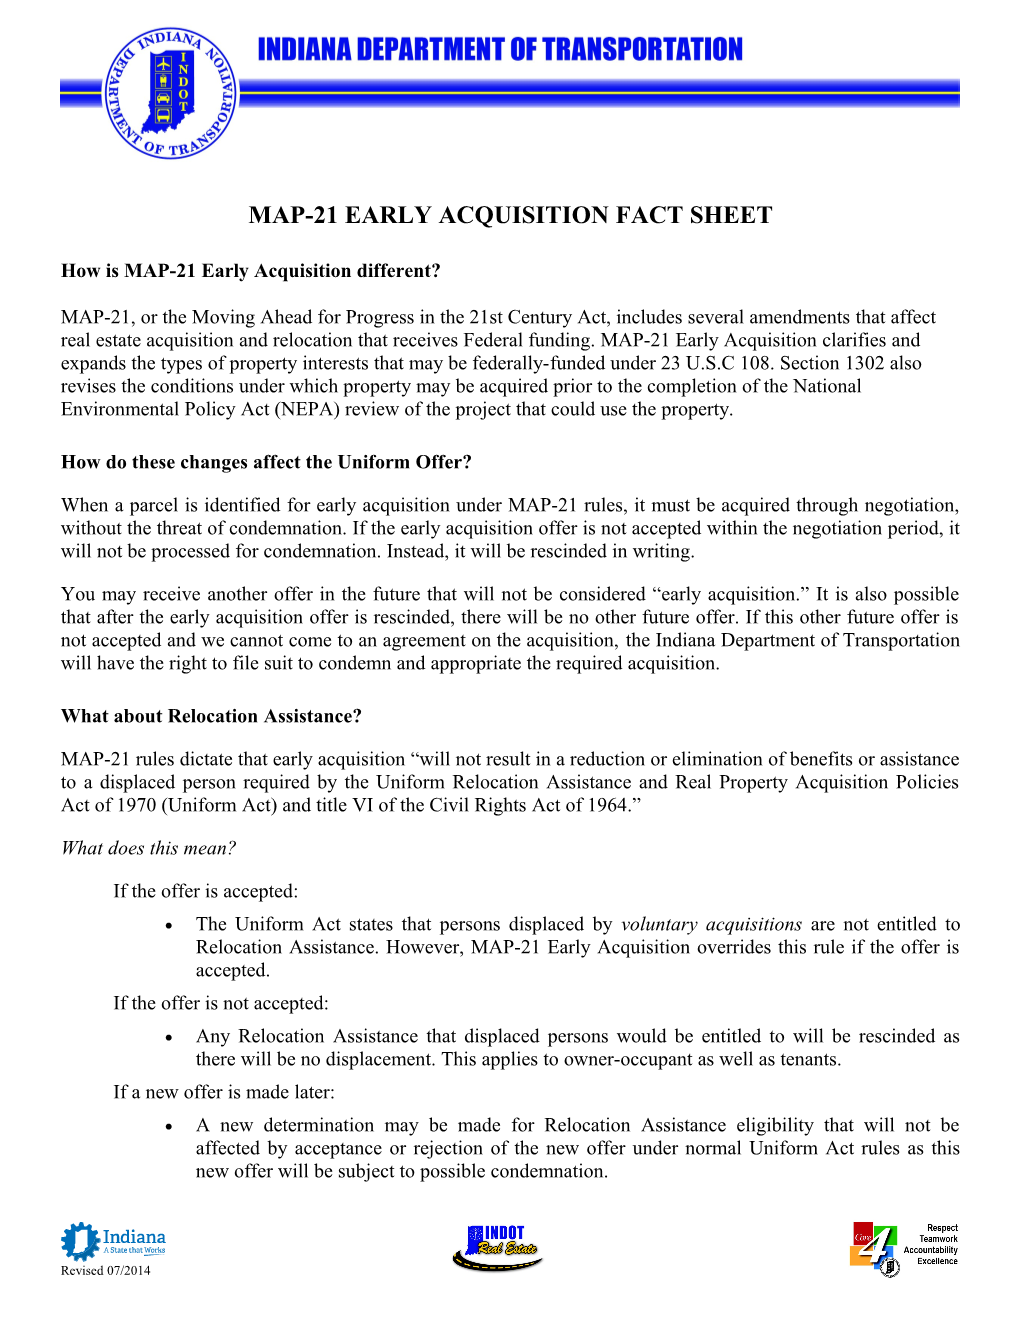 Map-21 Early Acquisition Fact Sheet